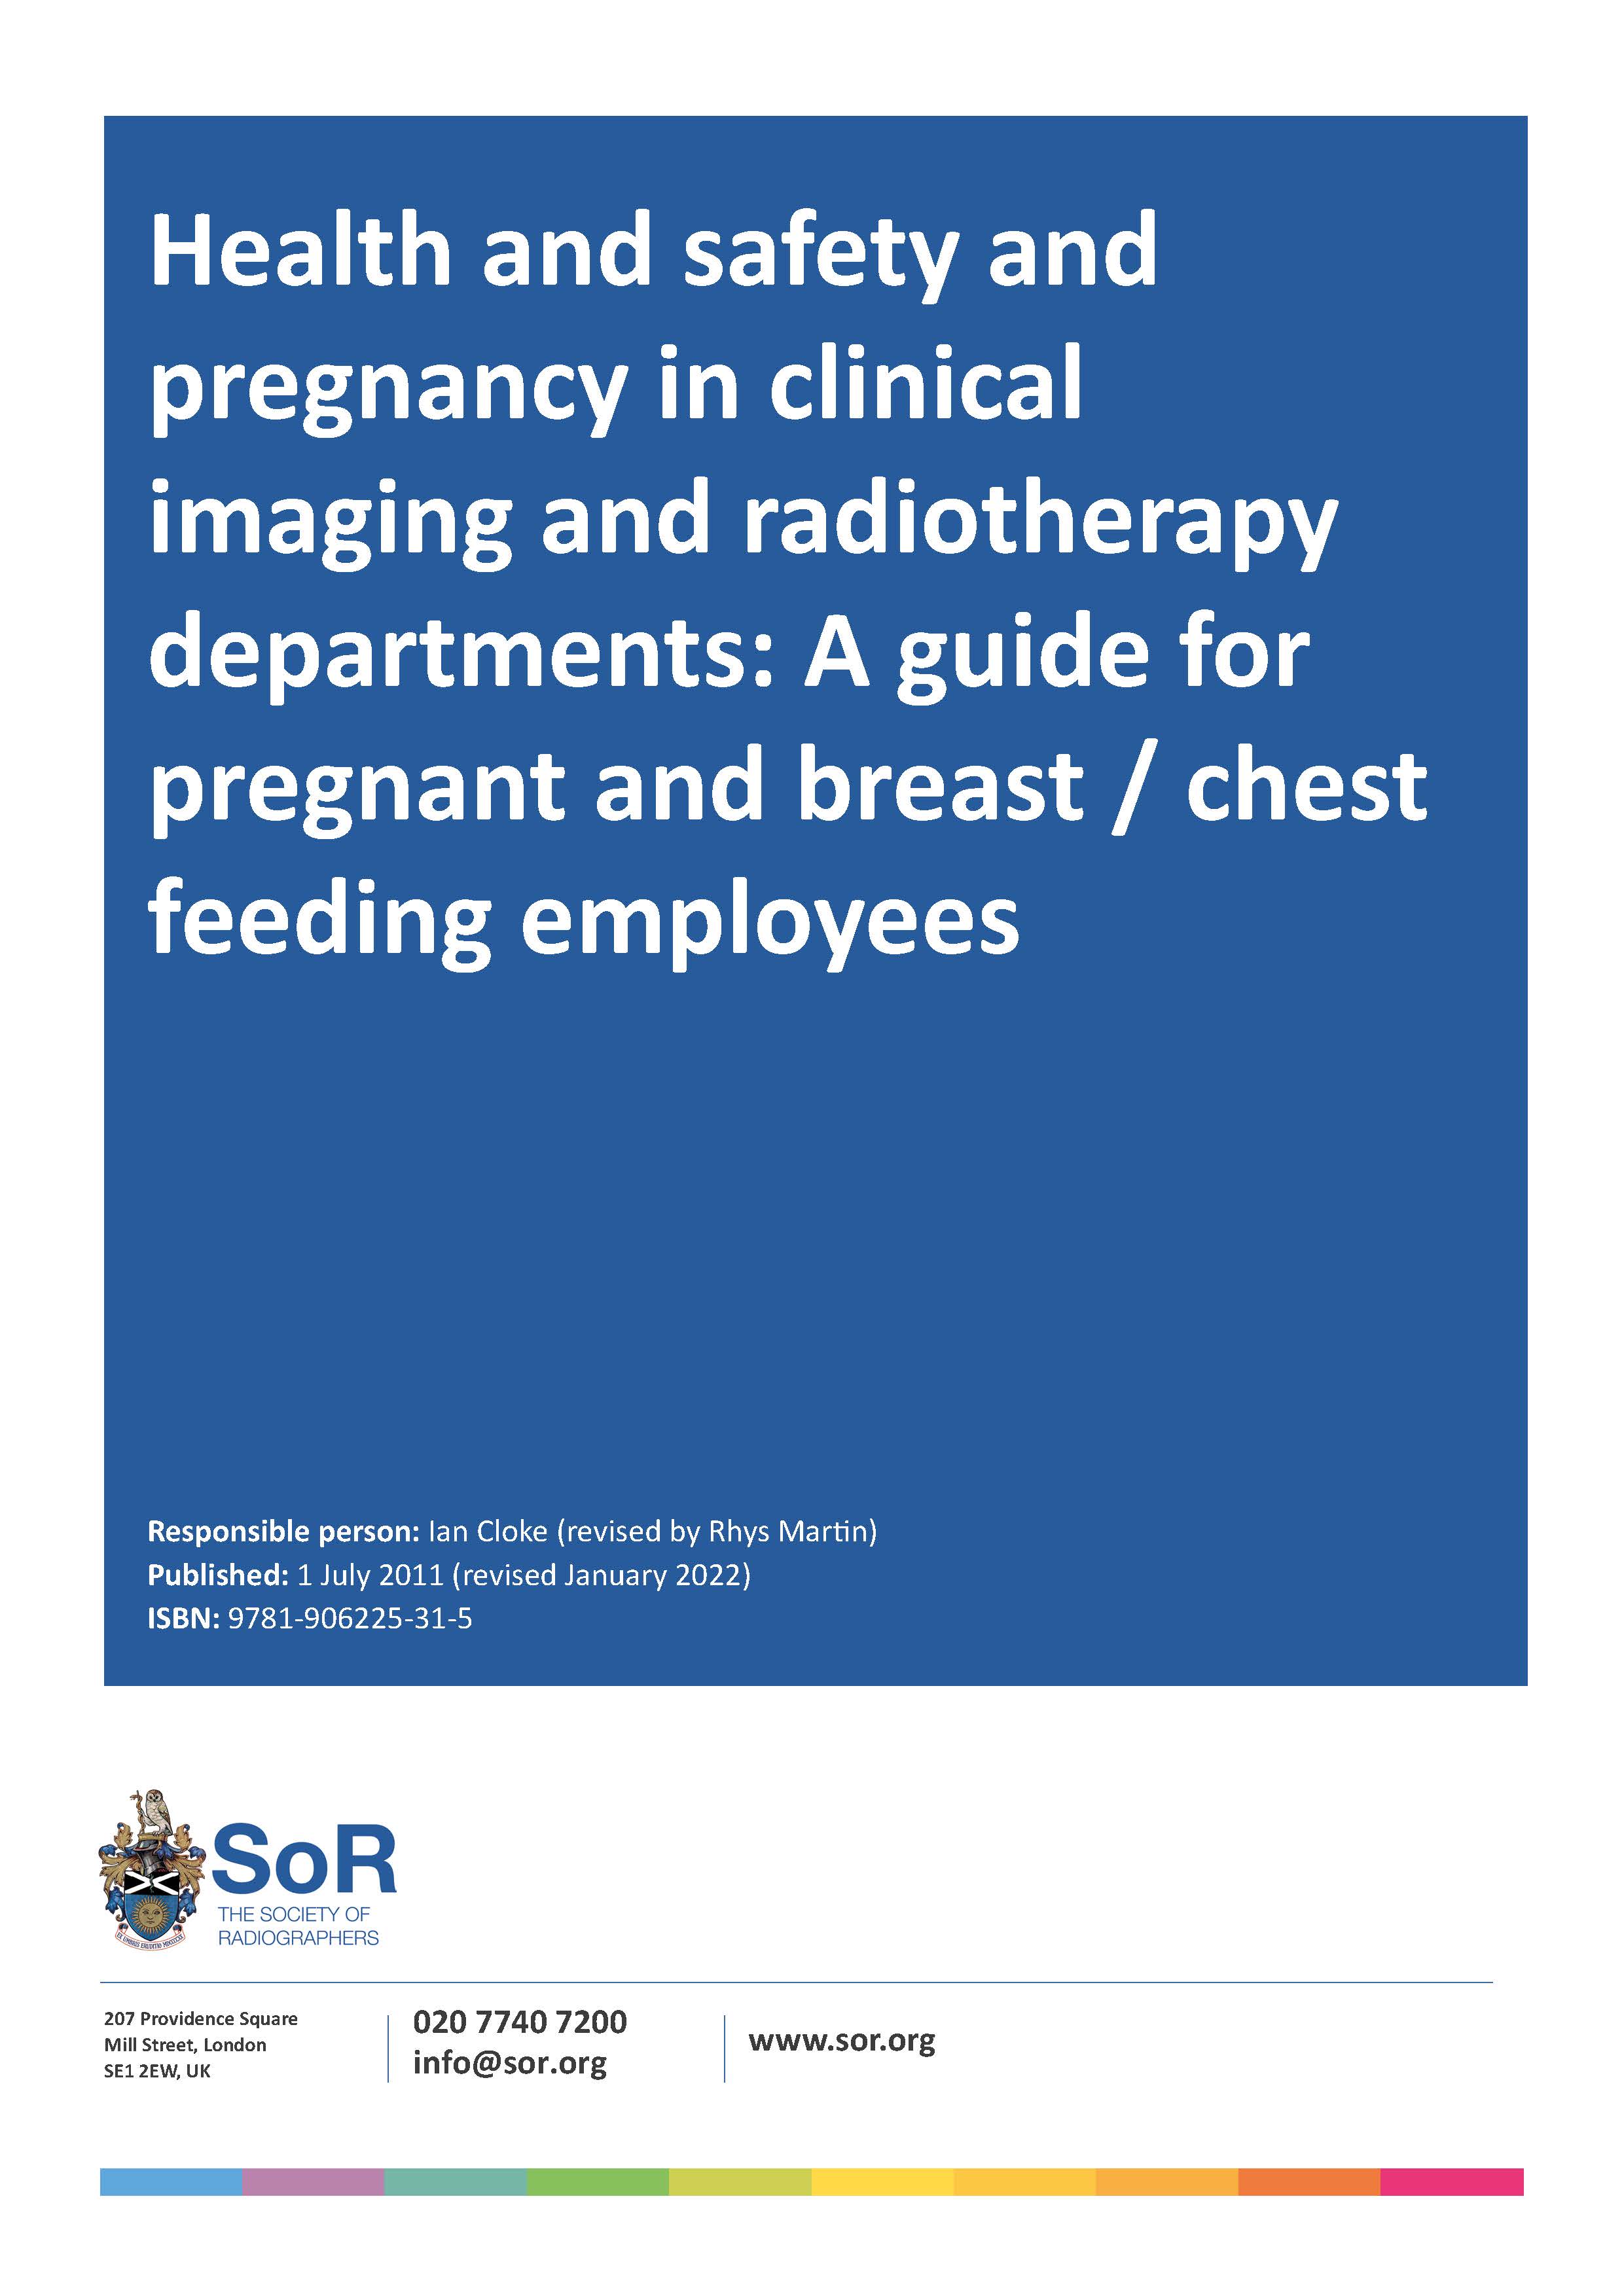 Health and safety and pregnancy in clinical imaging and radiotherapy departments: A guide for pregnant and breast / chest feeding employees